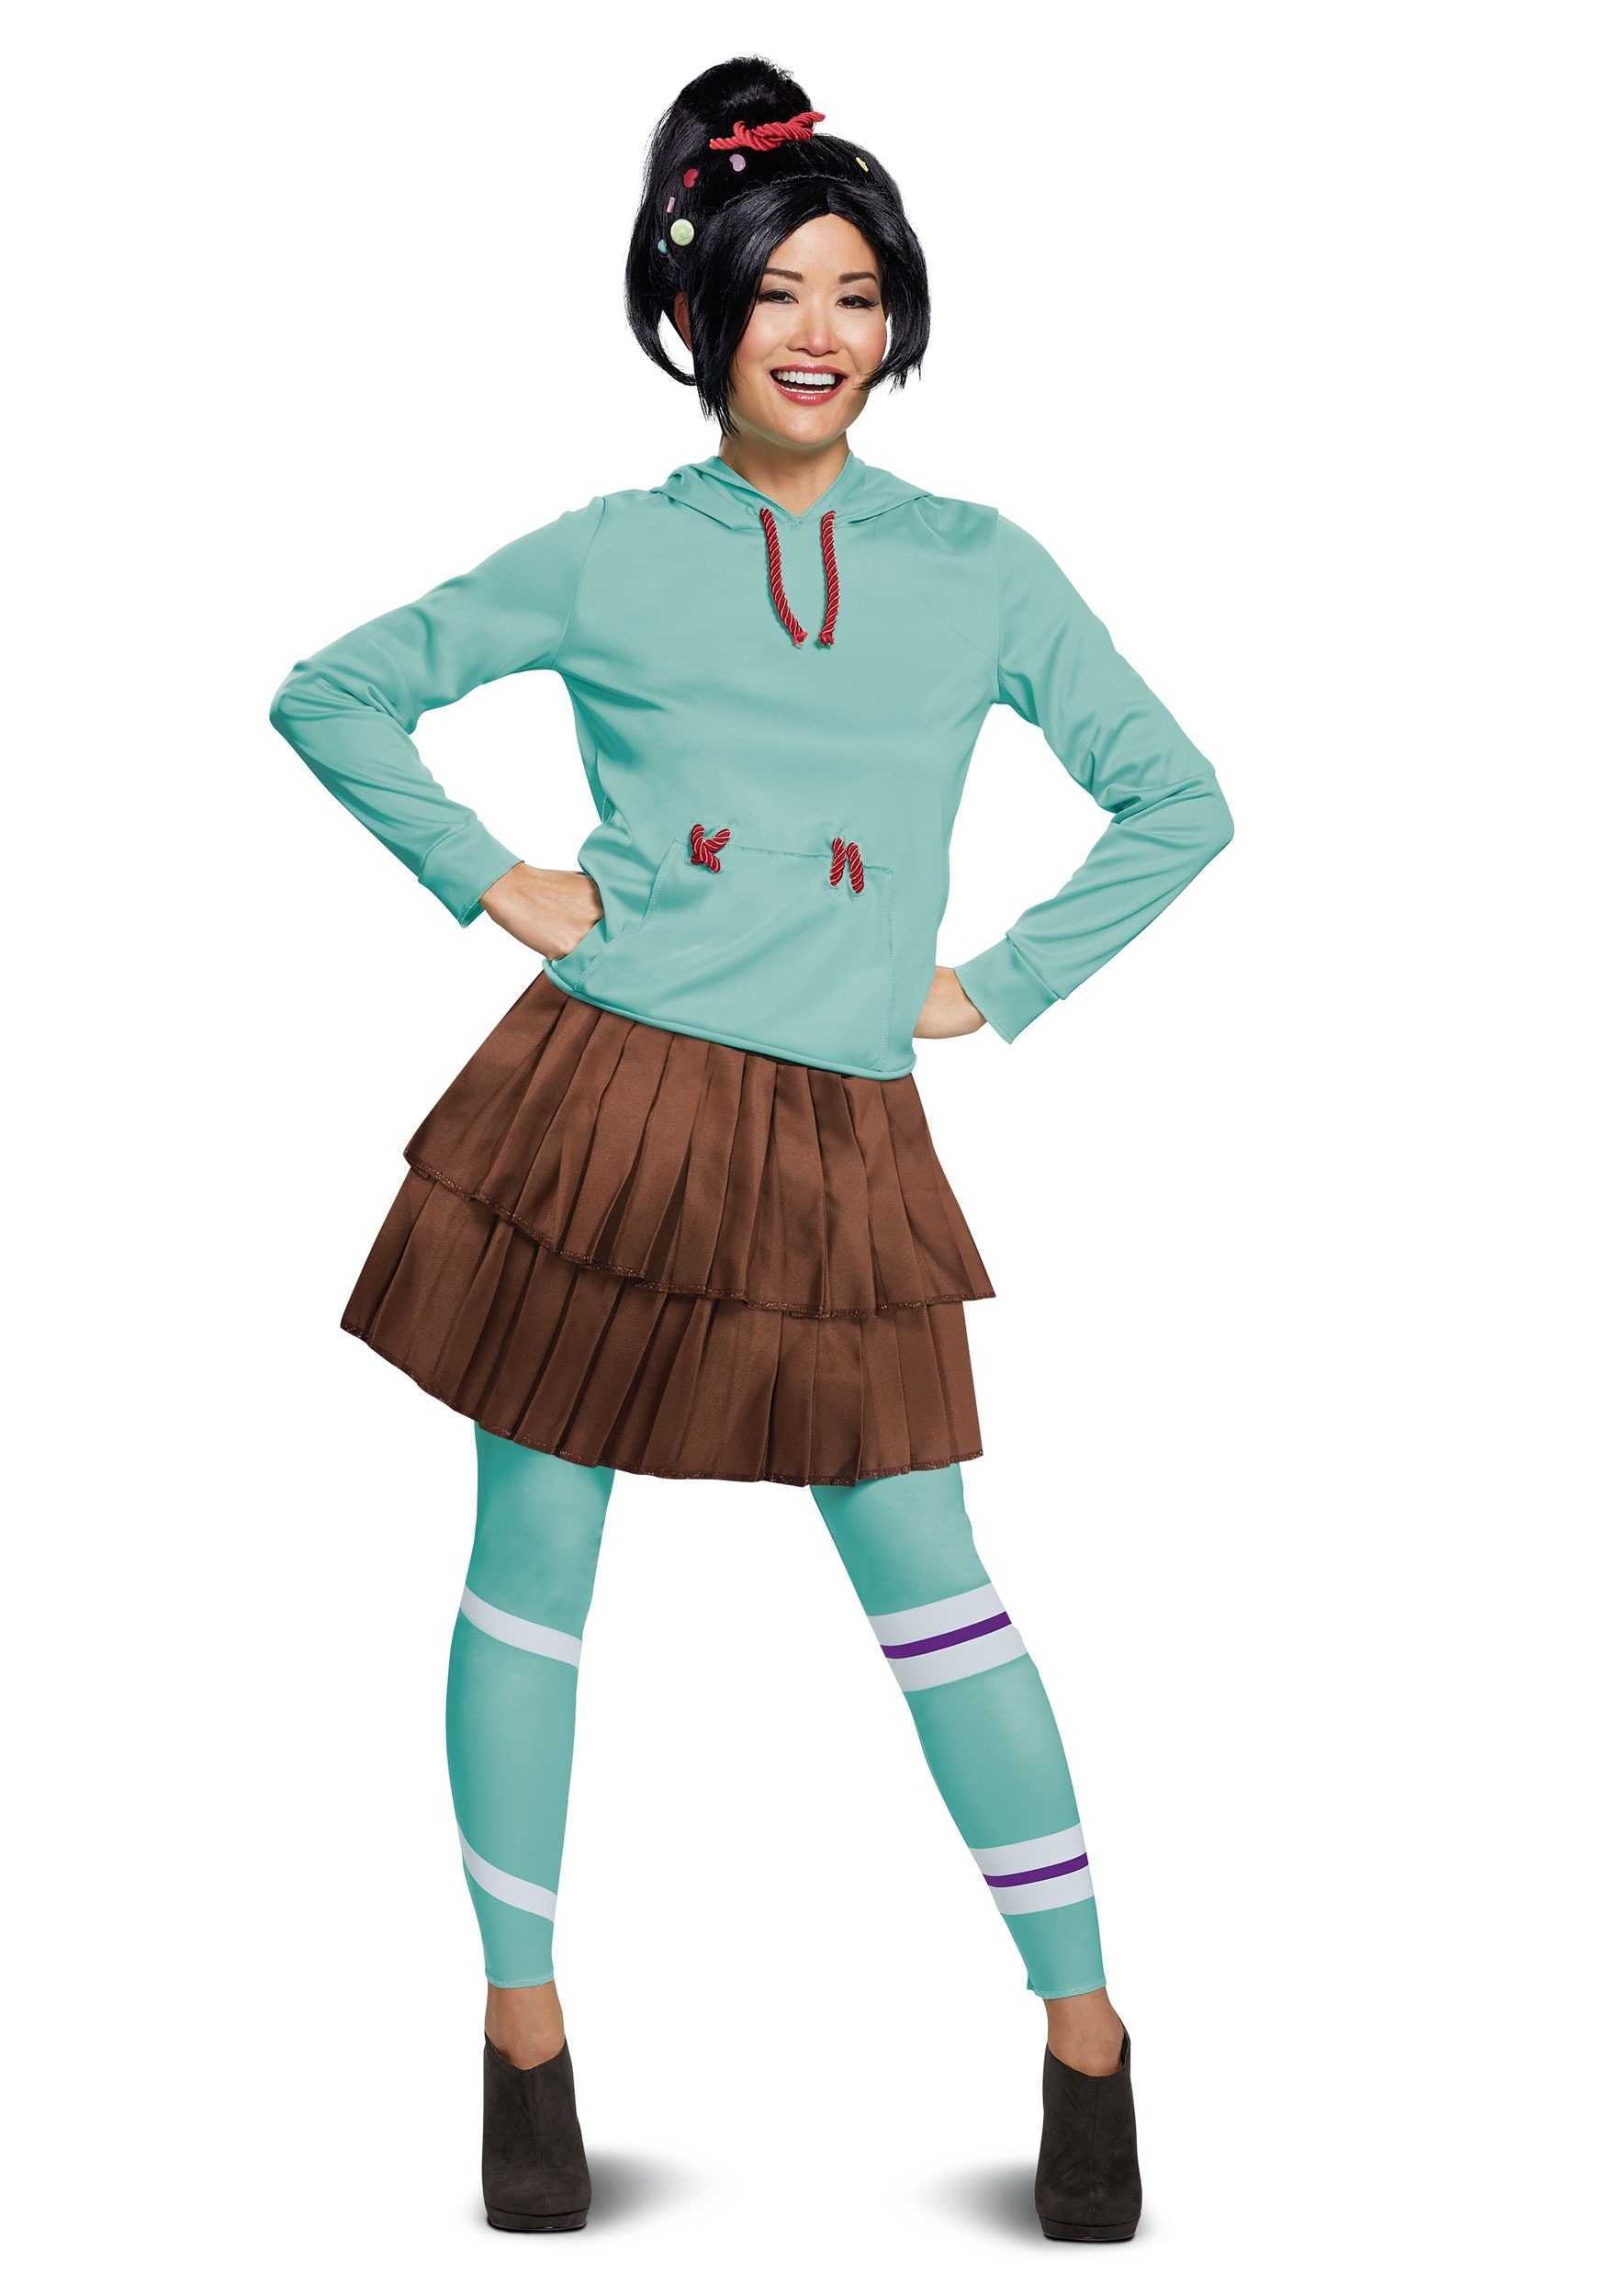 Image of Wreck It Ralph 2 Deluxe Vanellope Costume for Women ID DI67208-XS